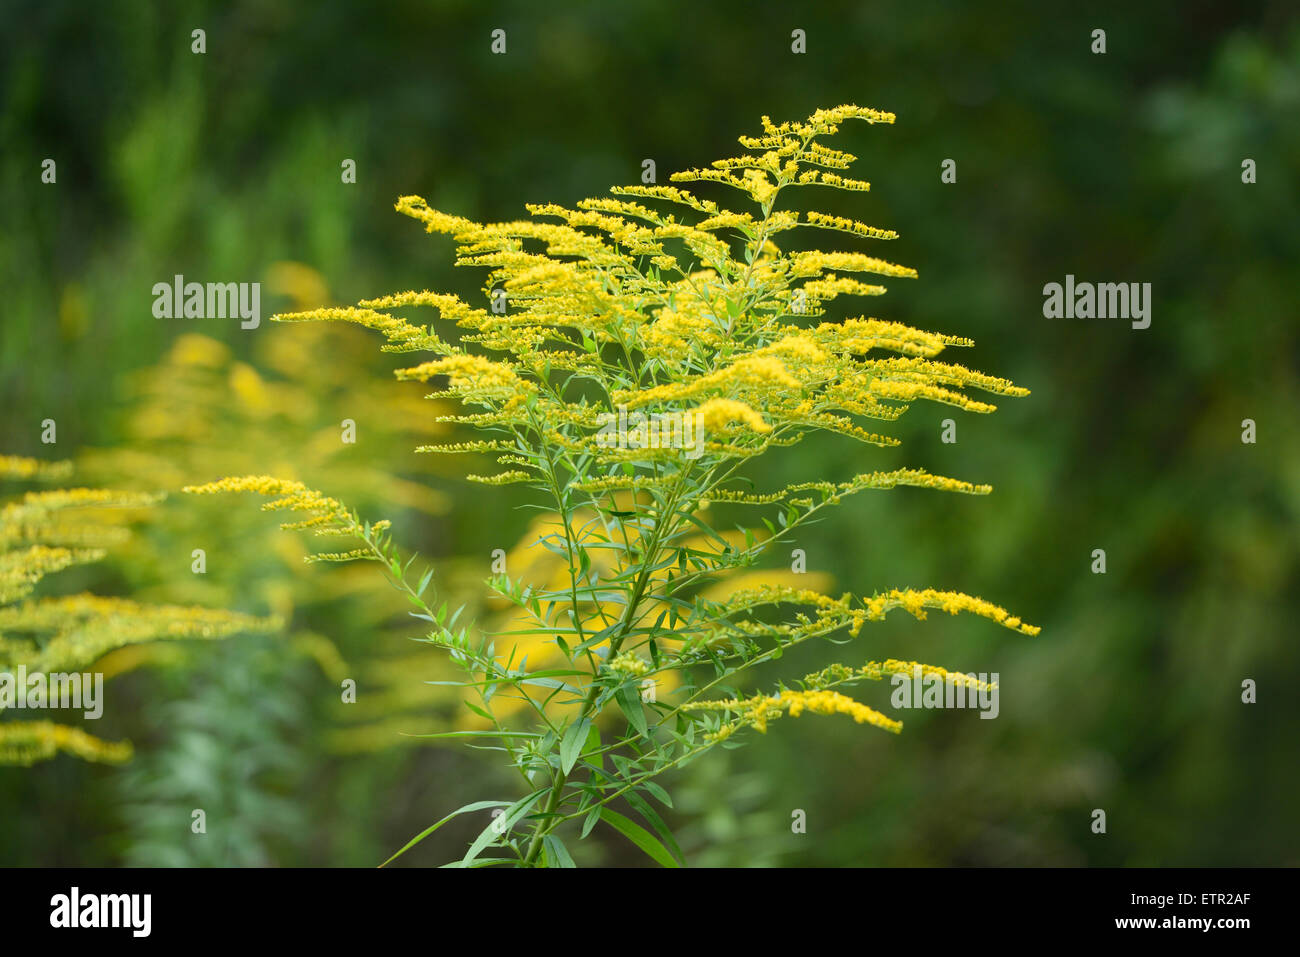 Canadian golden-rod, Solidago canadensis, blossoms, Stock Photo